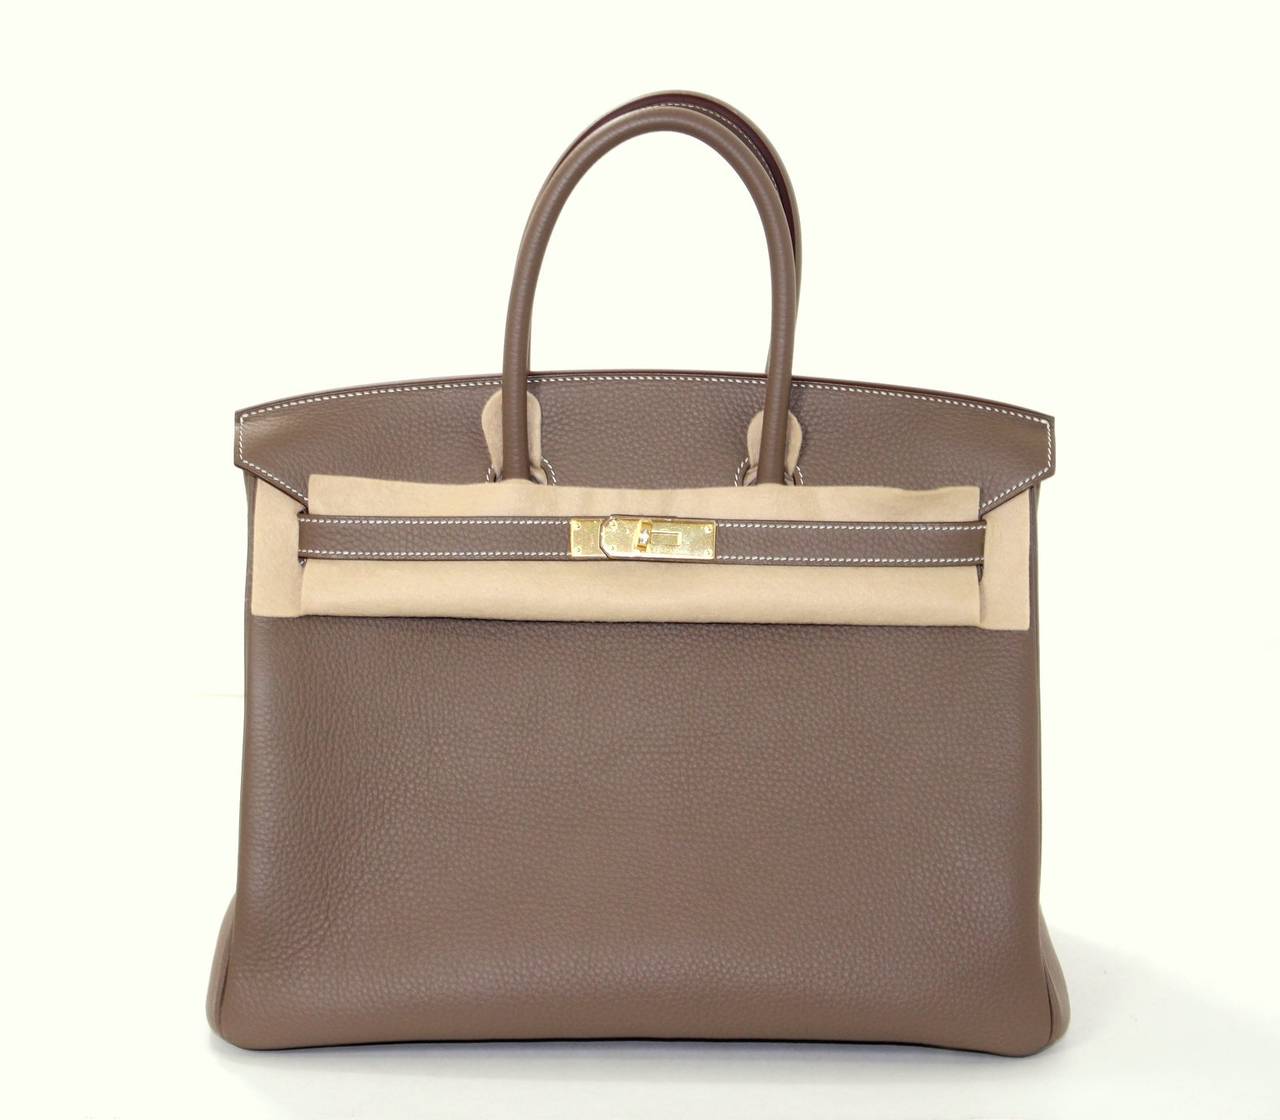 Hermes Birkin Bag in Etoupe Taupe color Togo with Gold, 35 cm size 3